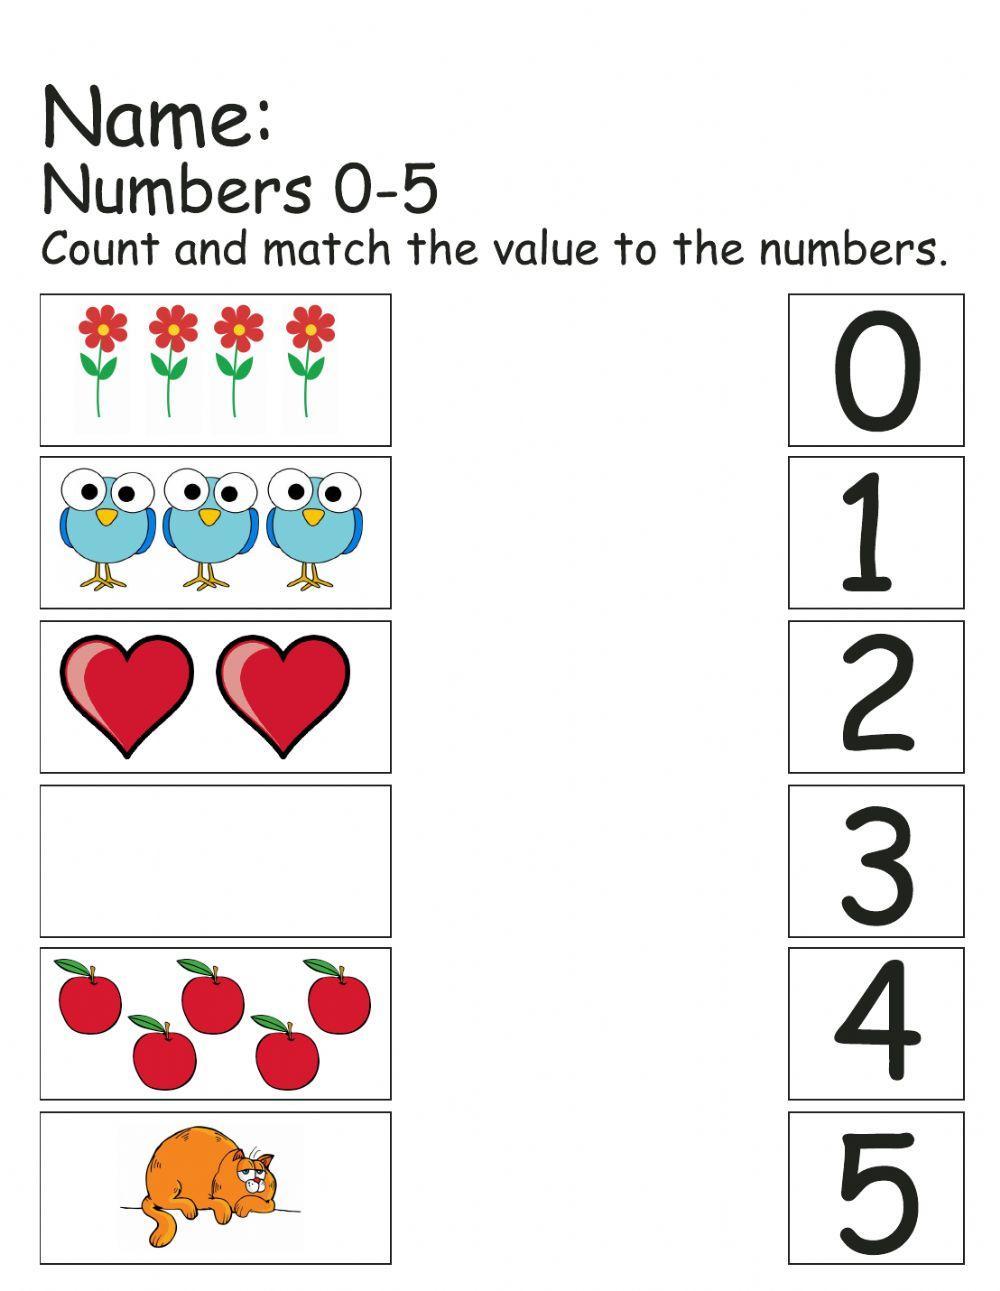 Numbers 0-5 (Values)